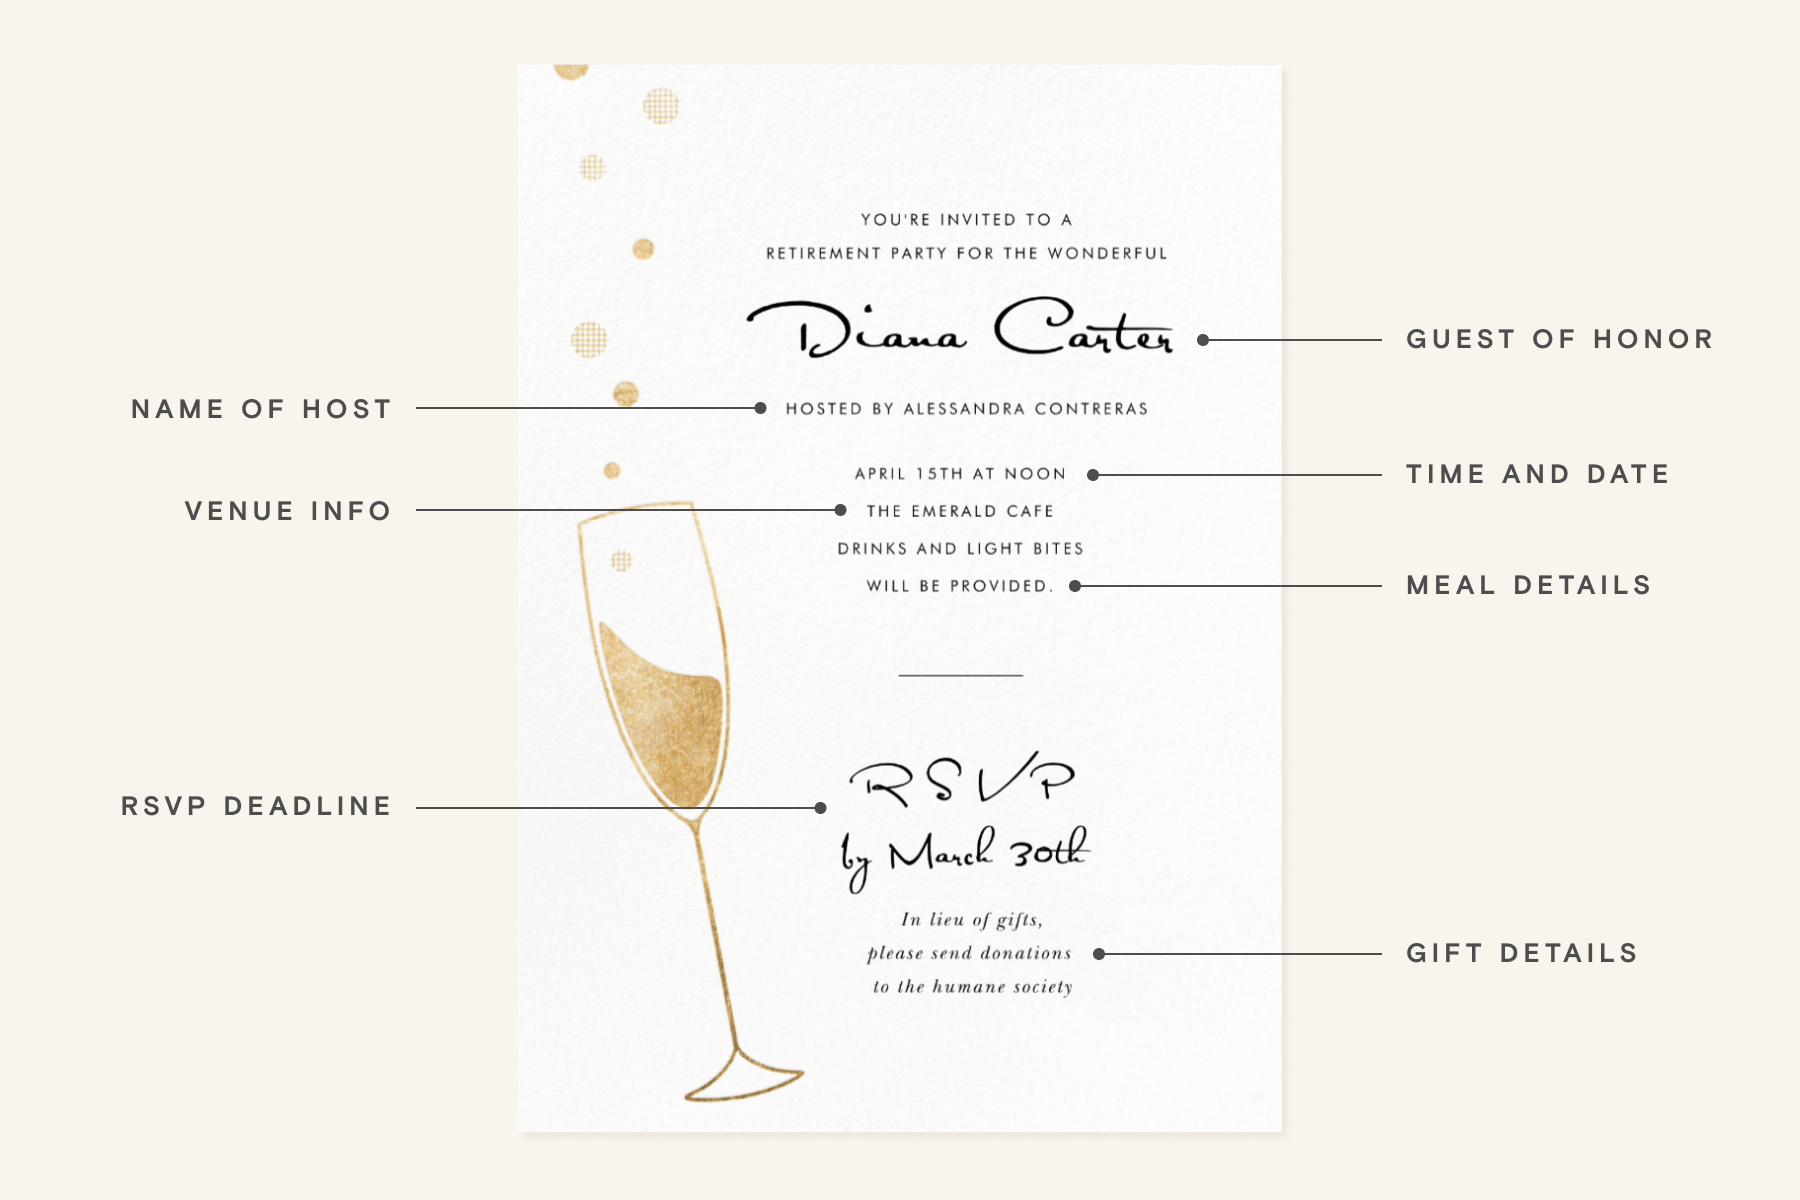 An invitation with a gold Champagne flute and event details pointed out in an infographic.